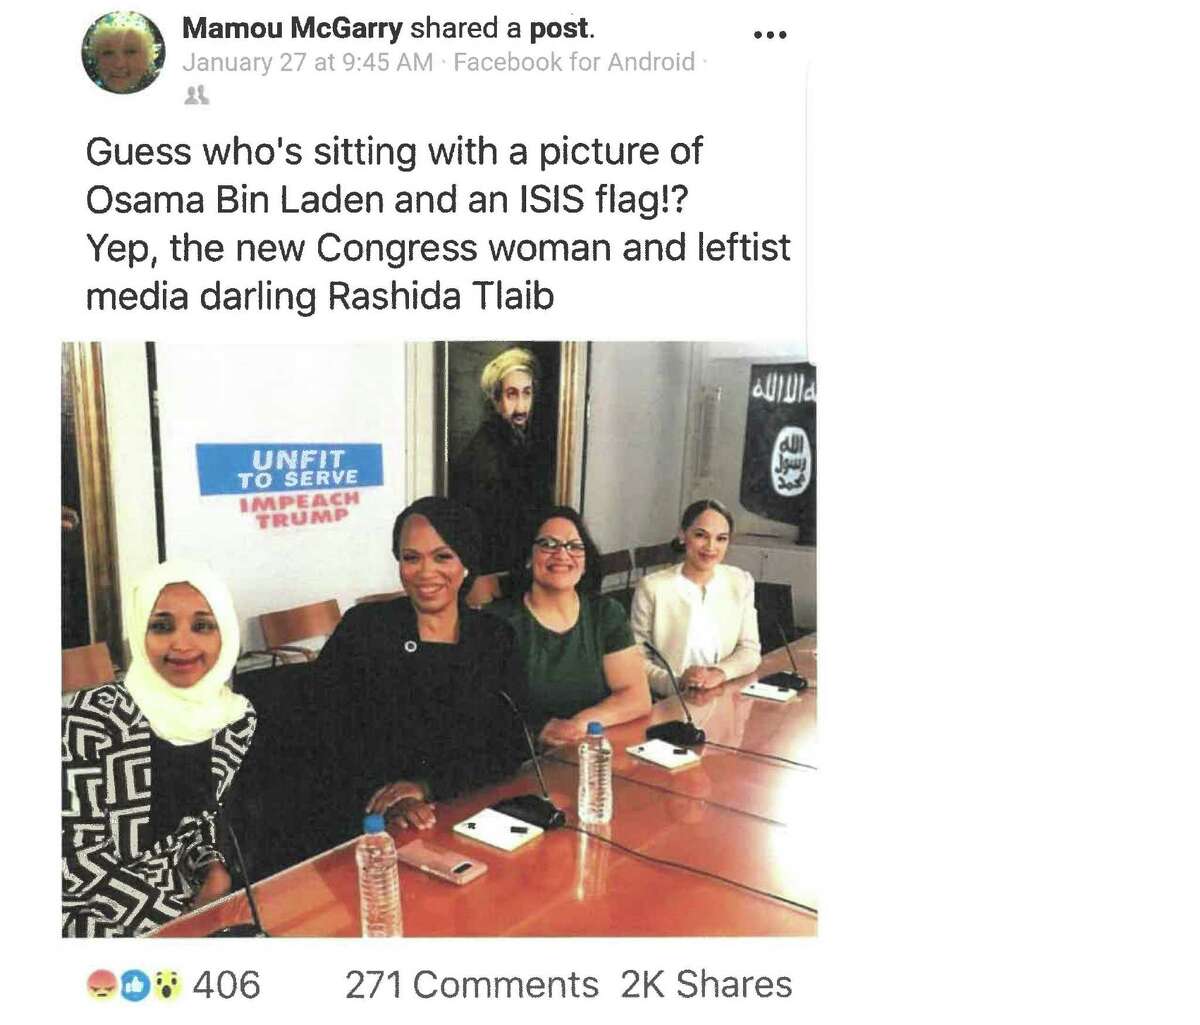 A Facebook post from the account of Marion McGarry, a Democrat on the Stamford Board of Representatives.